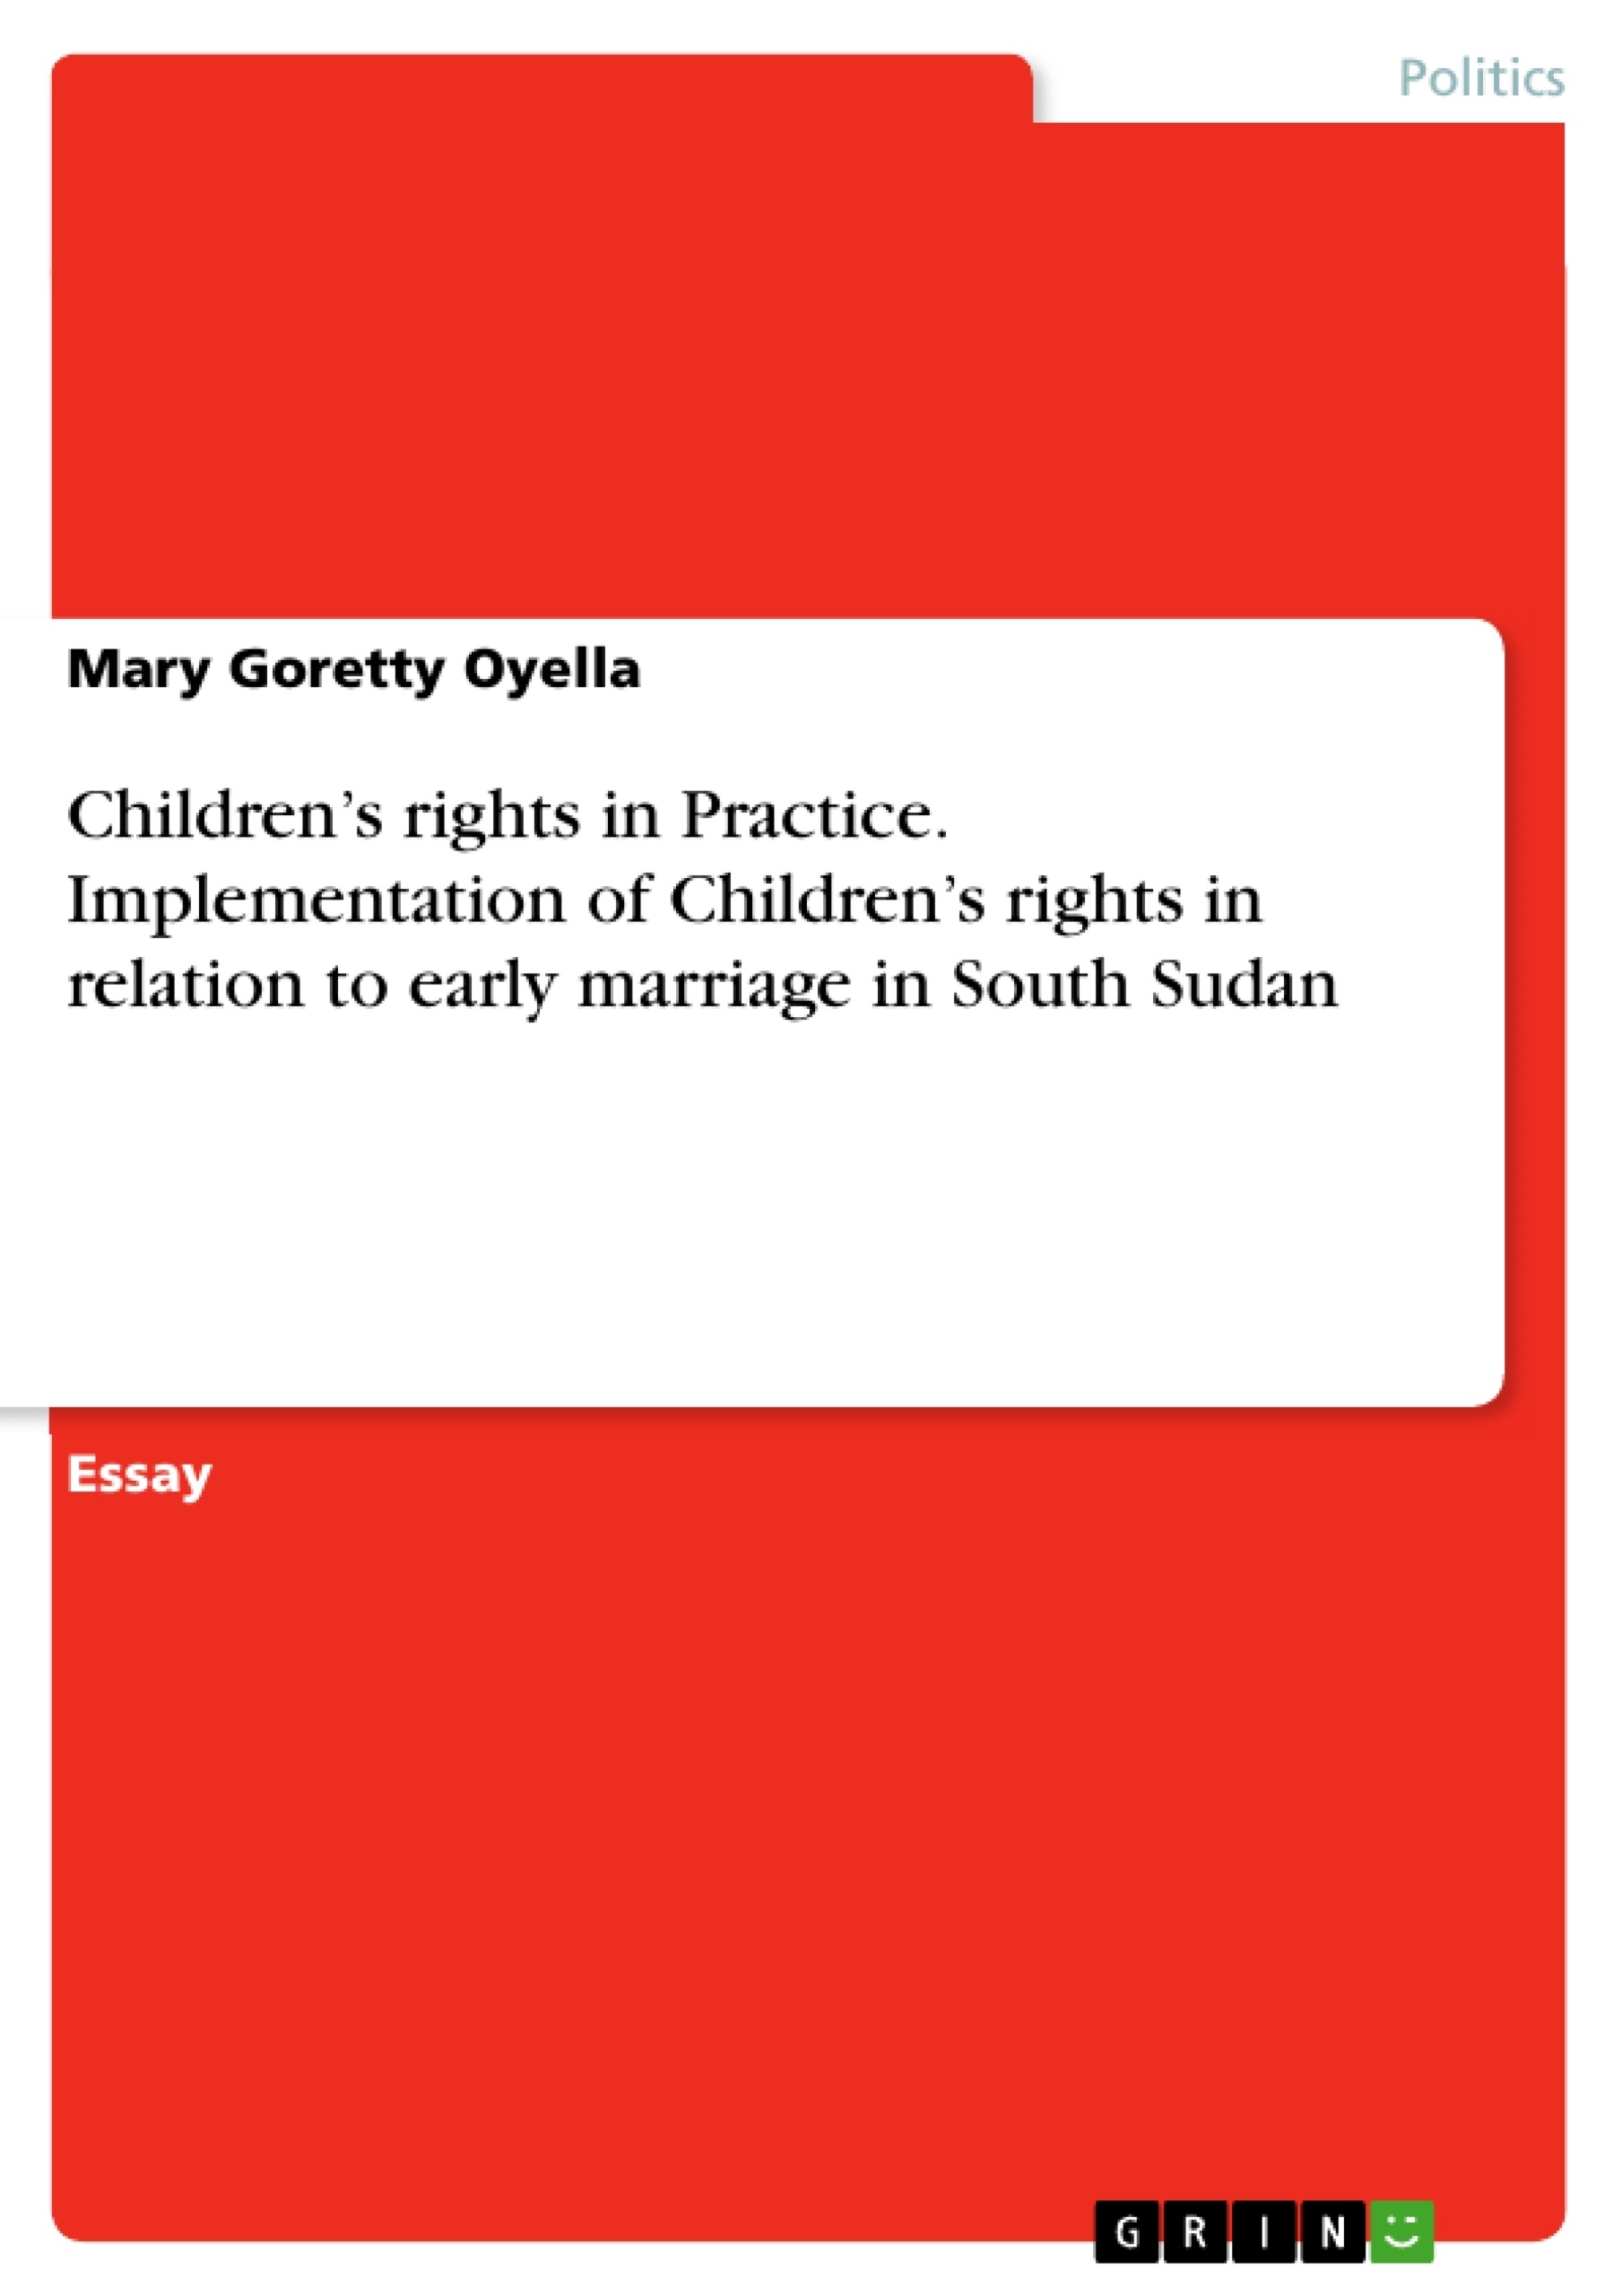 Title: Children’s rights in Practice. Implementation of Children’s rights in relation to early marriage in South Sudan